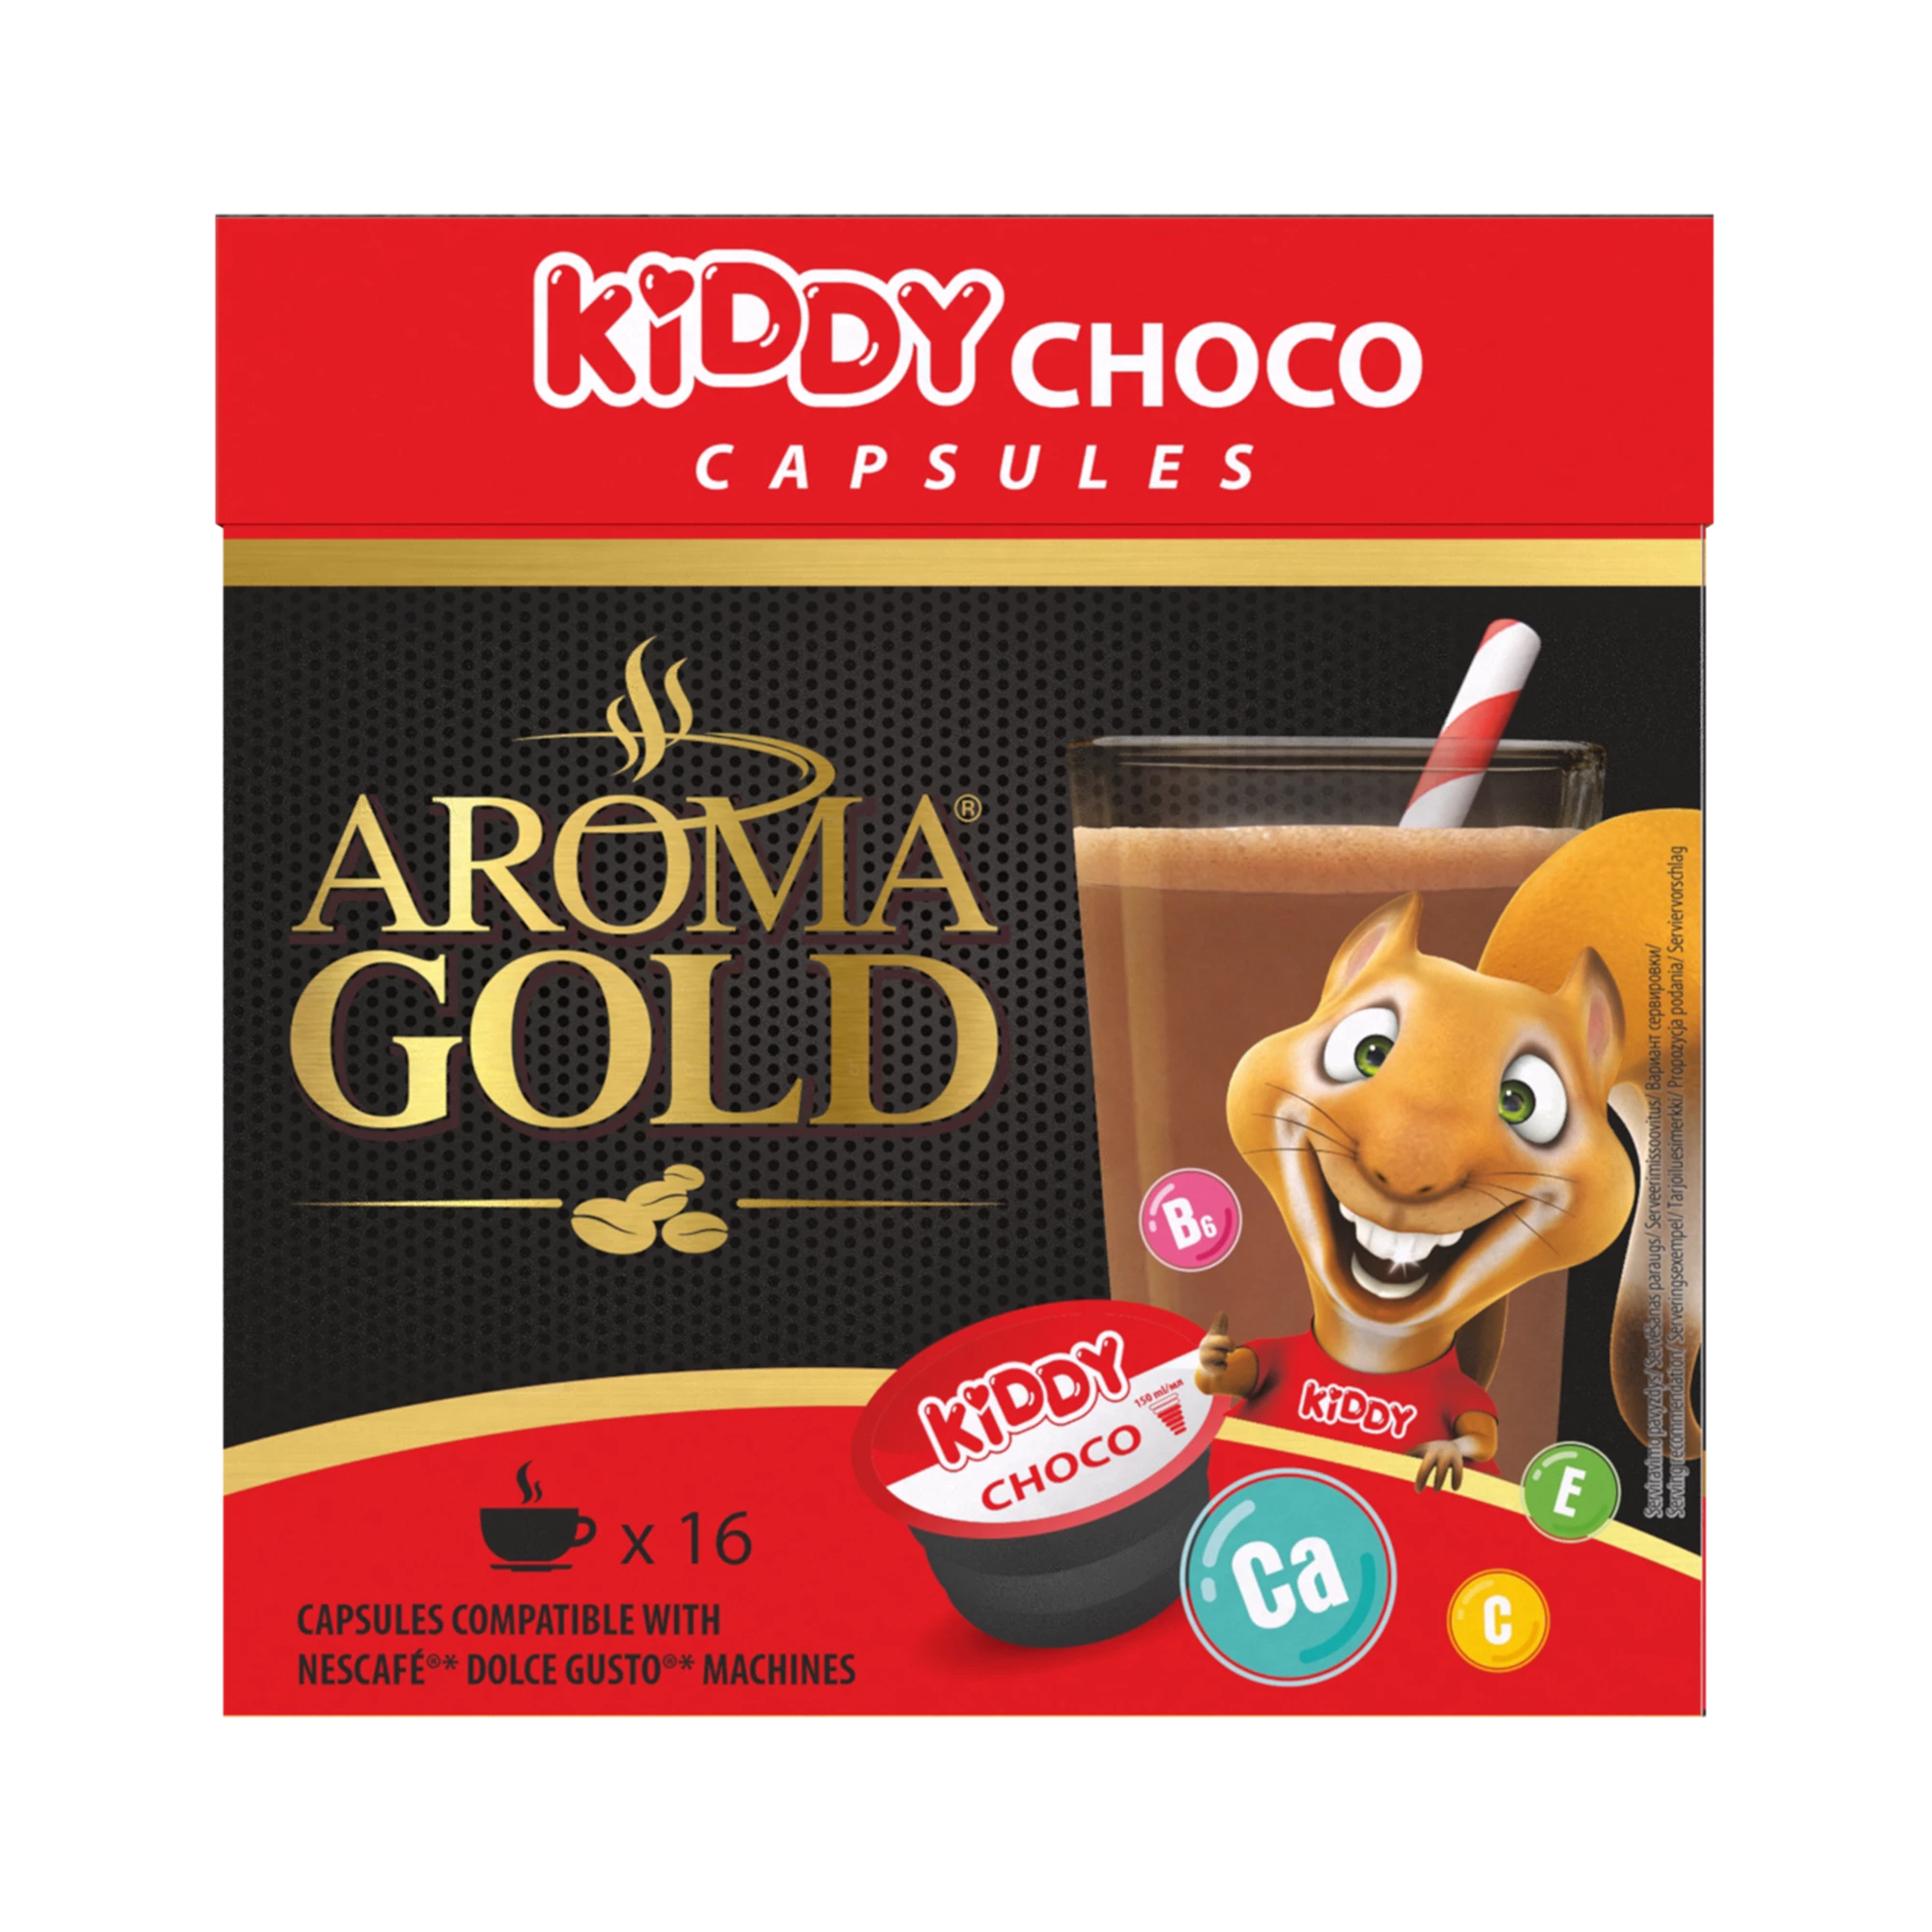 Capsule "kiddy Cacao" Compatibili Dolce Gusto X 16 - Aroma Gold